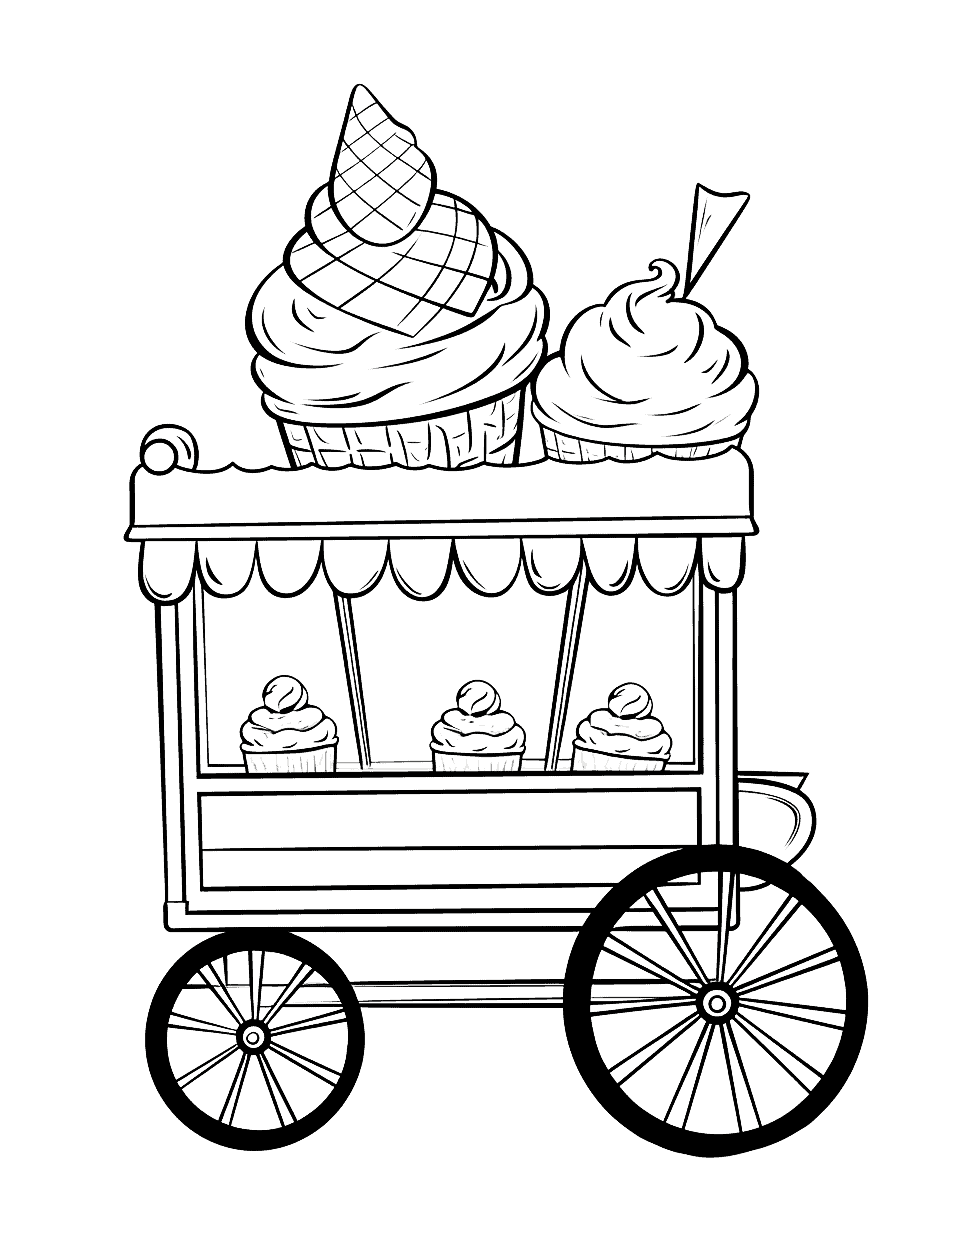 Summer Ice Cream Cart Coloring Page - A vintage summer cart filled with different flavors of ice cream.